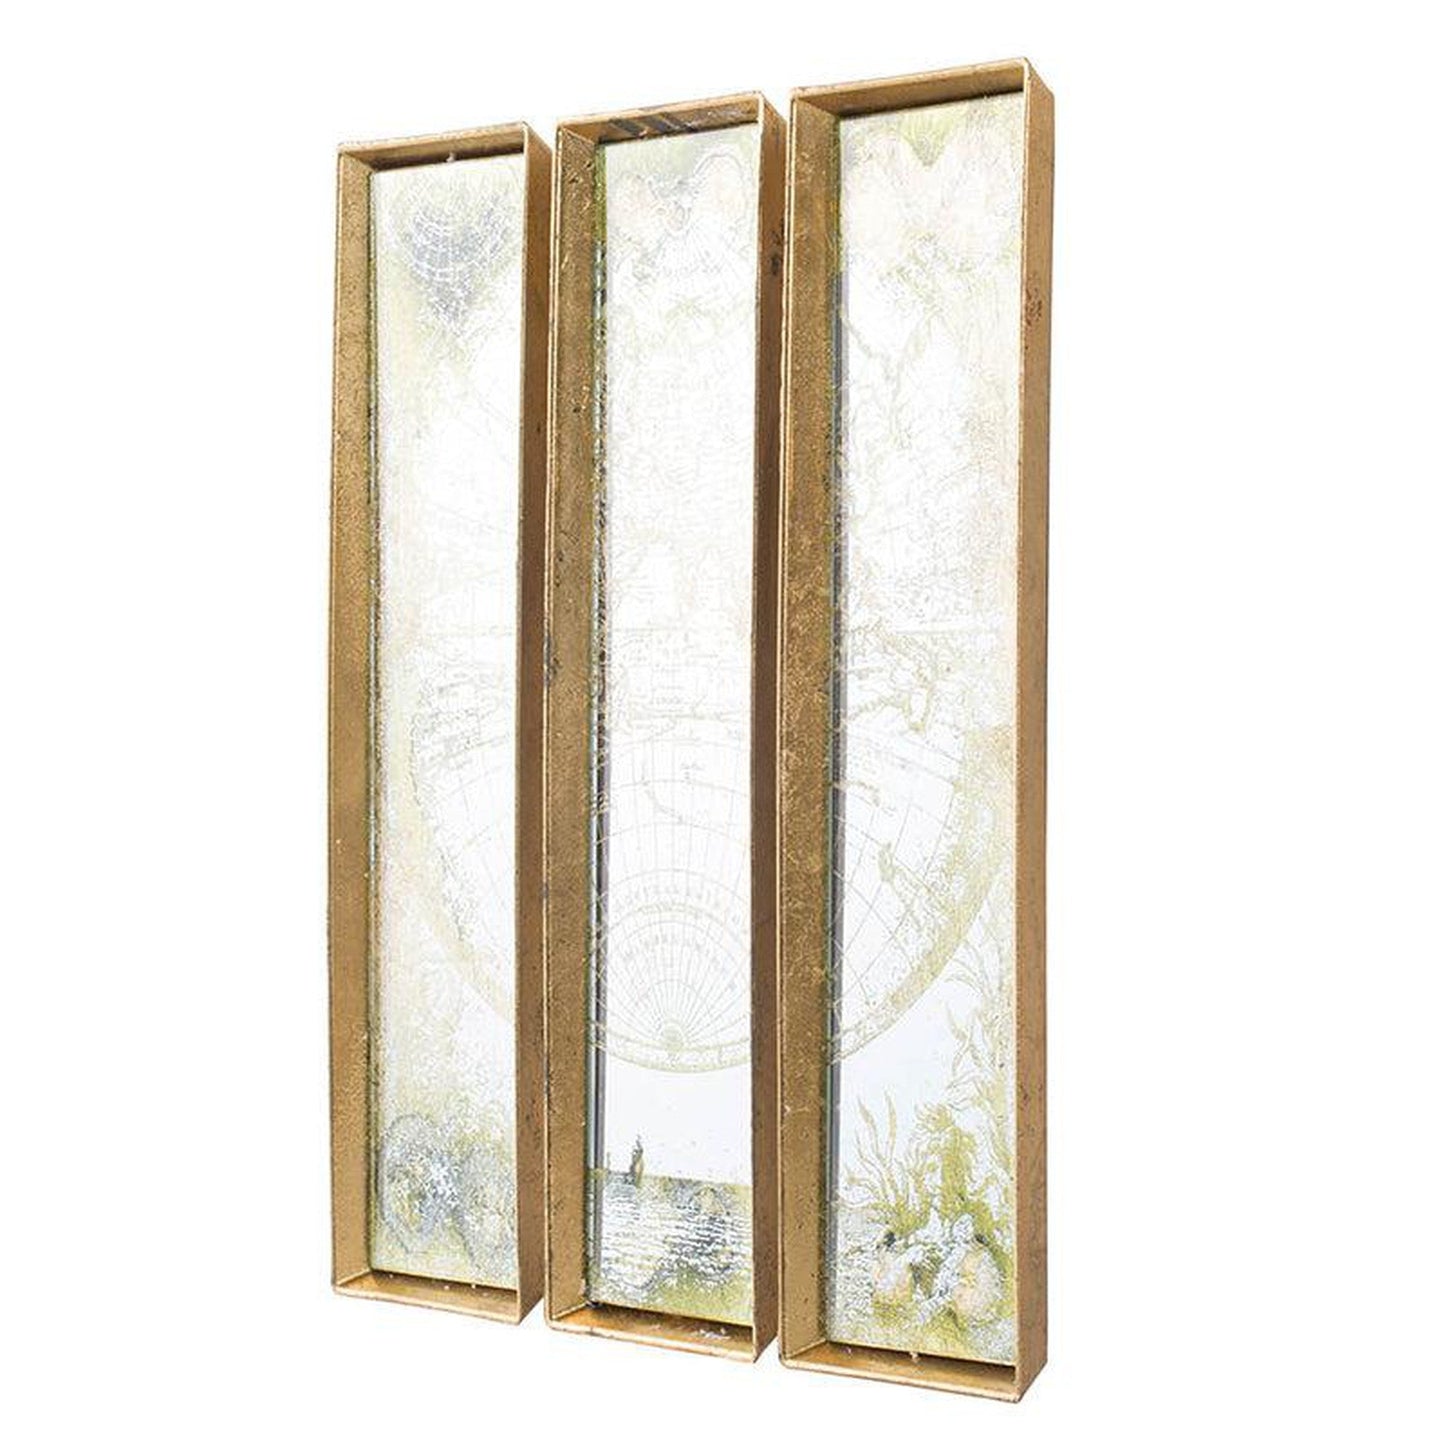 A&B Home 5" x 17" Bundle of 15 6 Sets of Rectangular Antique Gold Frame Wall-Mounted